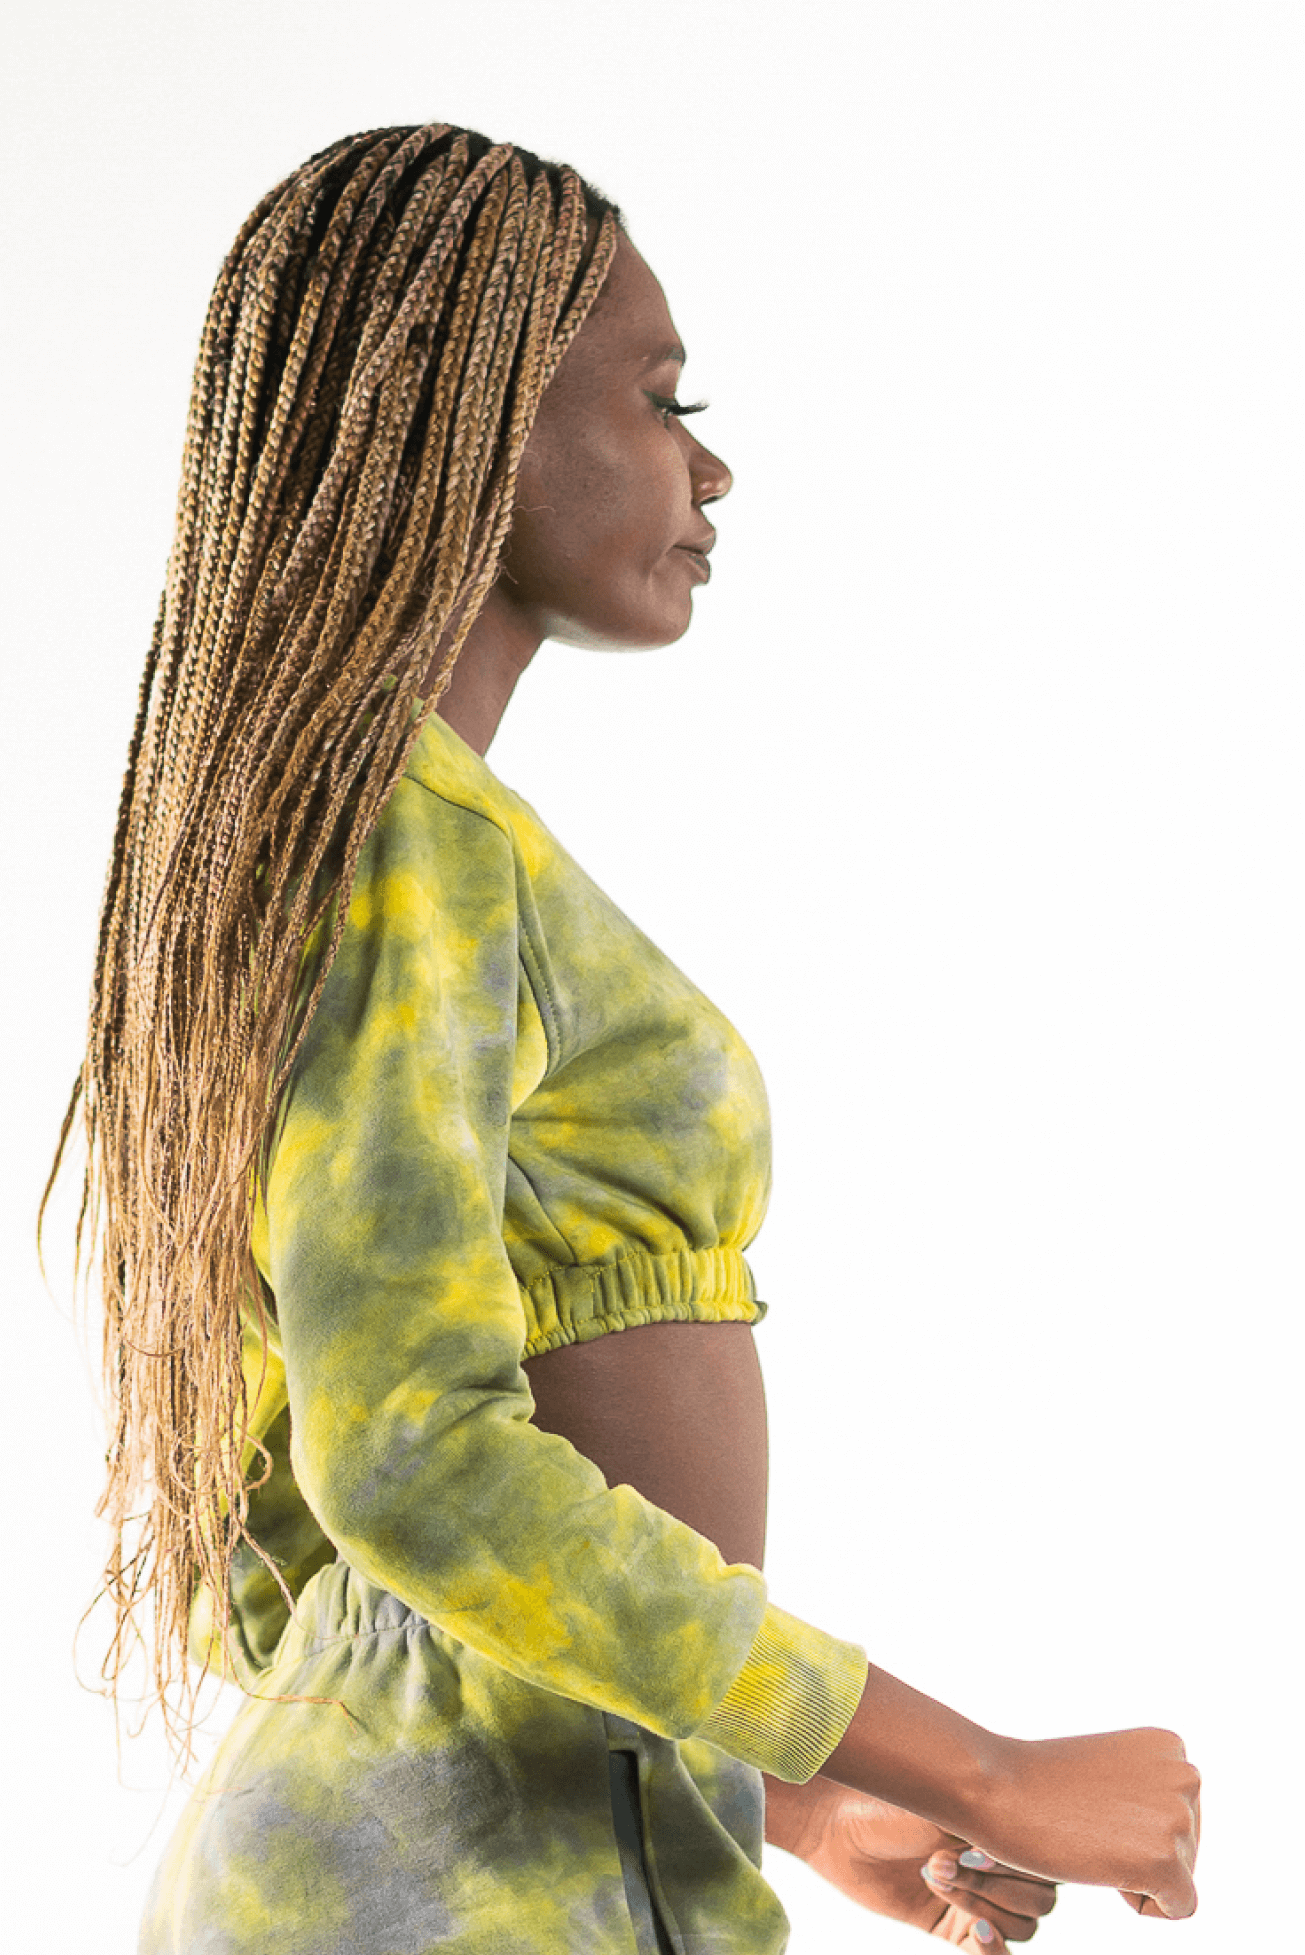 Shop Upeo Crop Top (Yellow & Black Bland) by Regalia Apparel on Arrai. Discover stylish, affordable clothing, jewelry, handbags and unique handmade pieces from top Kenyan & African fashion brands prioritising sustainability and quality craftsmanship.